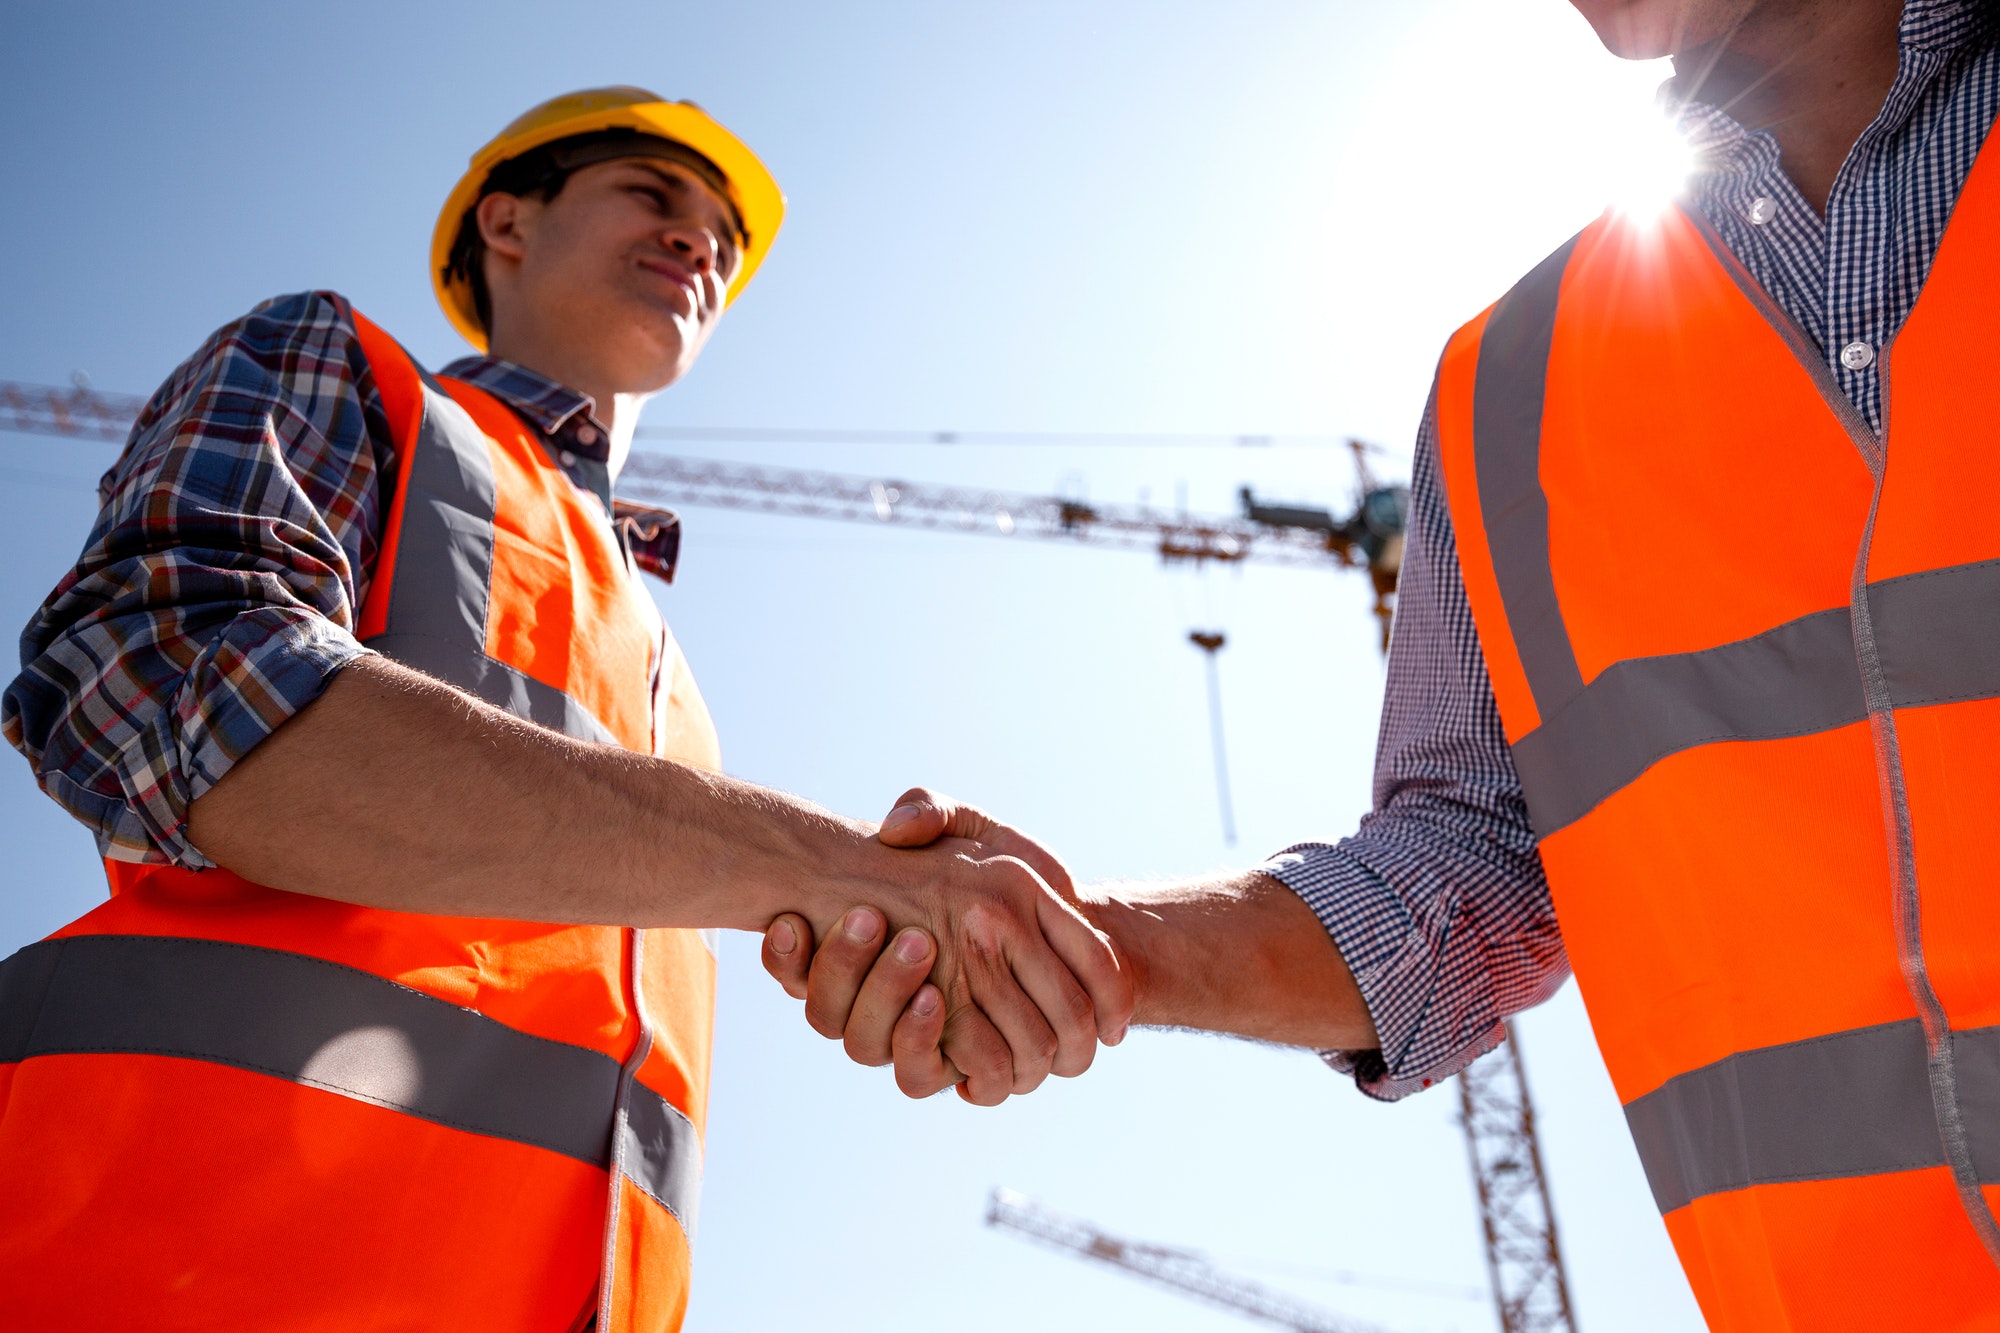 structural-engineer-and-architect-dressed-in-orange-work-vests-and-helmets-shake-hands-on-the